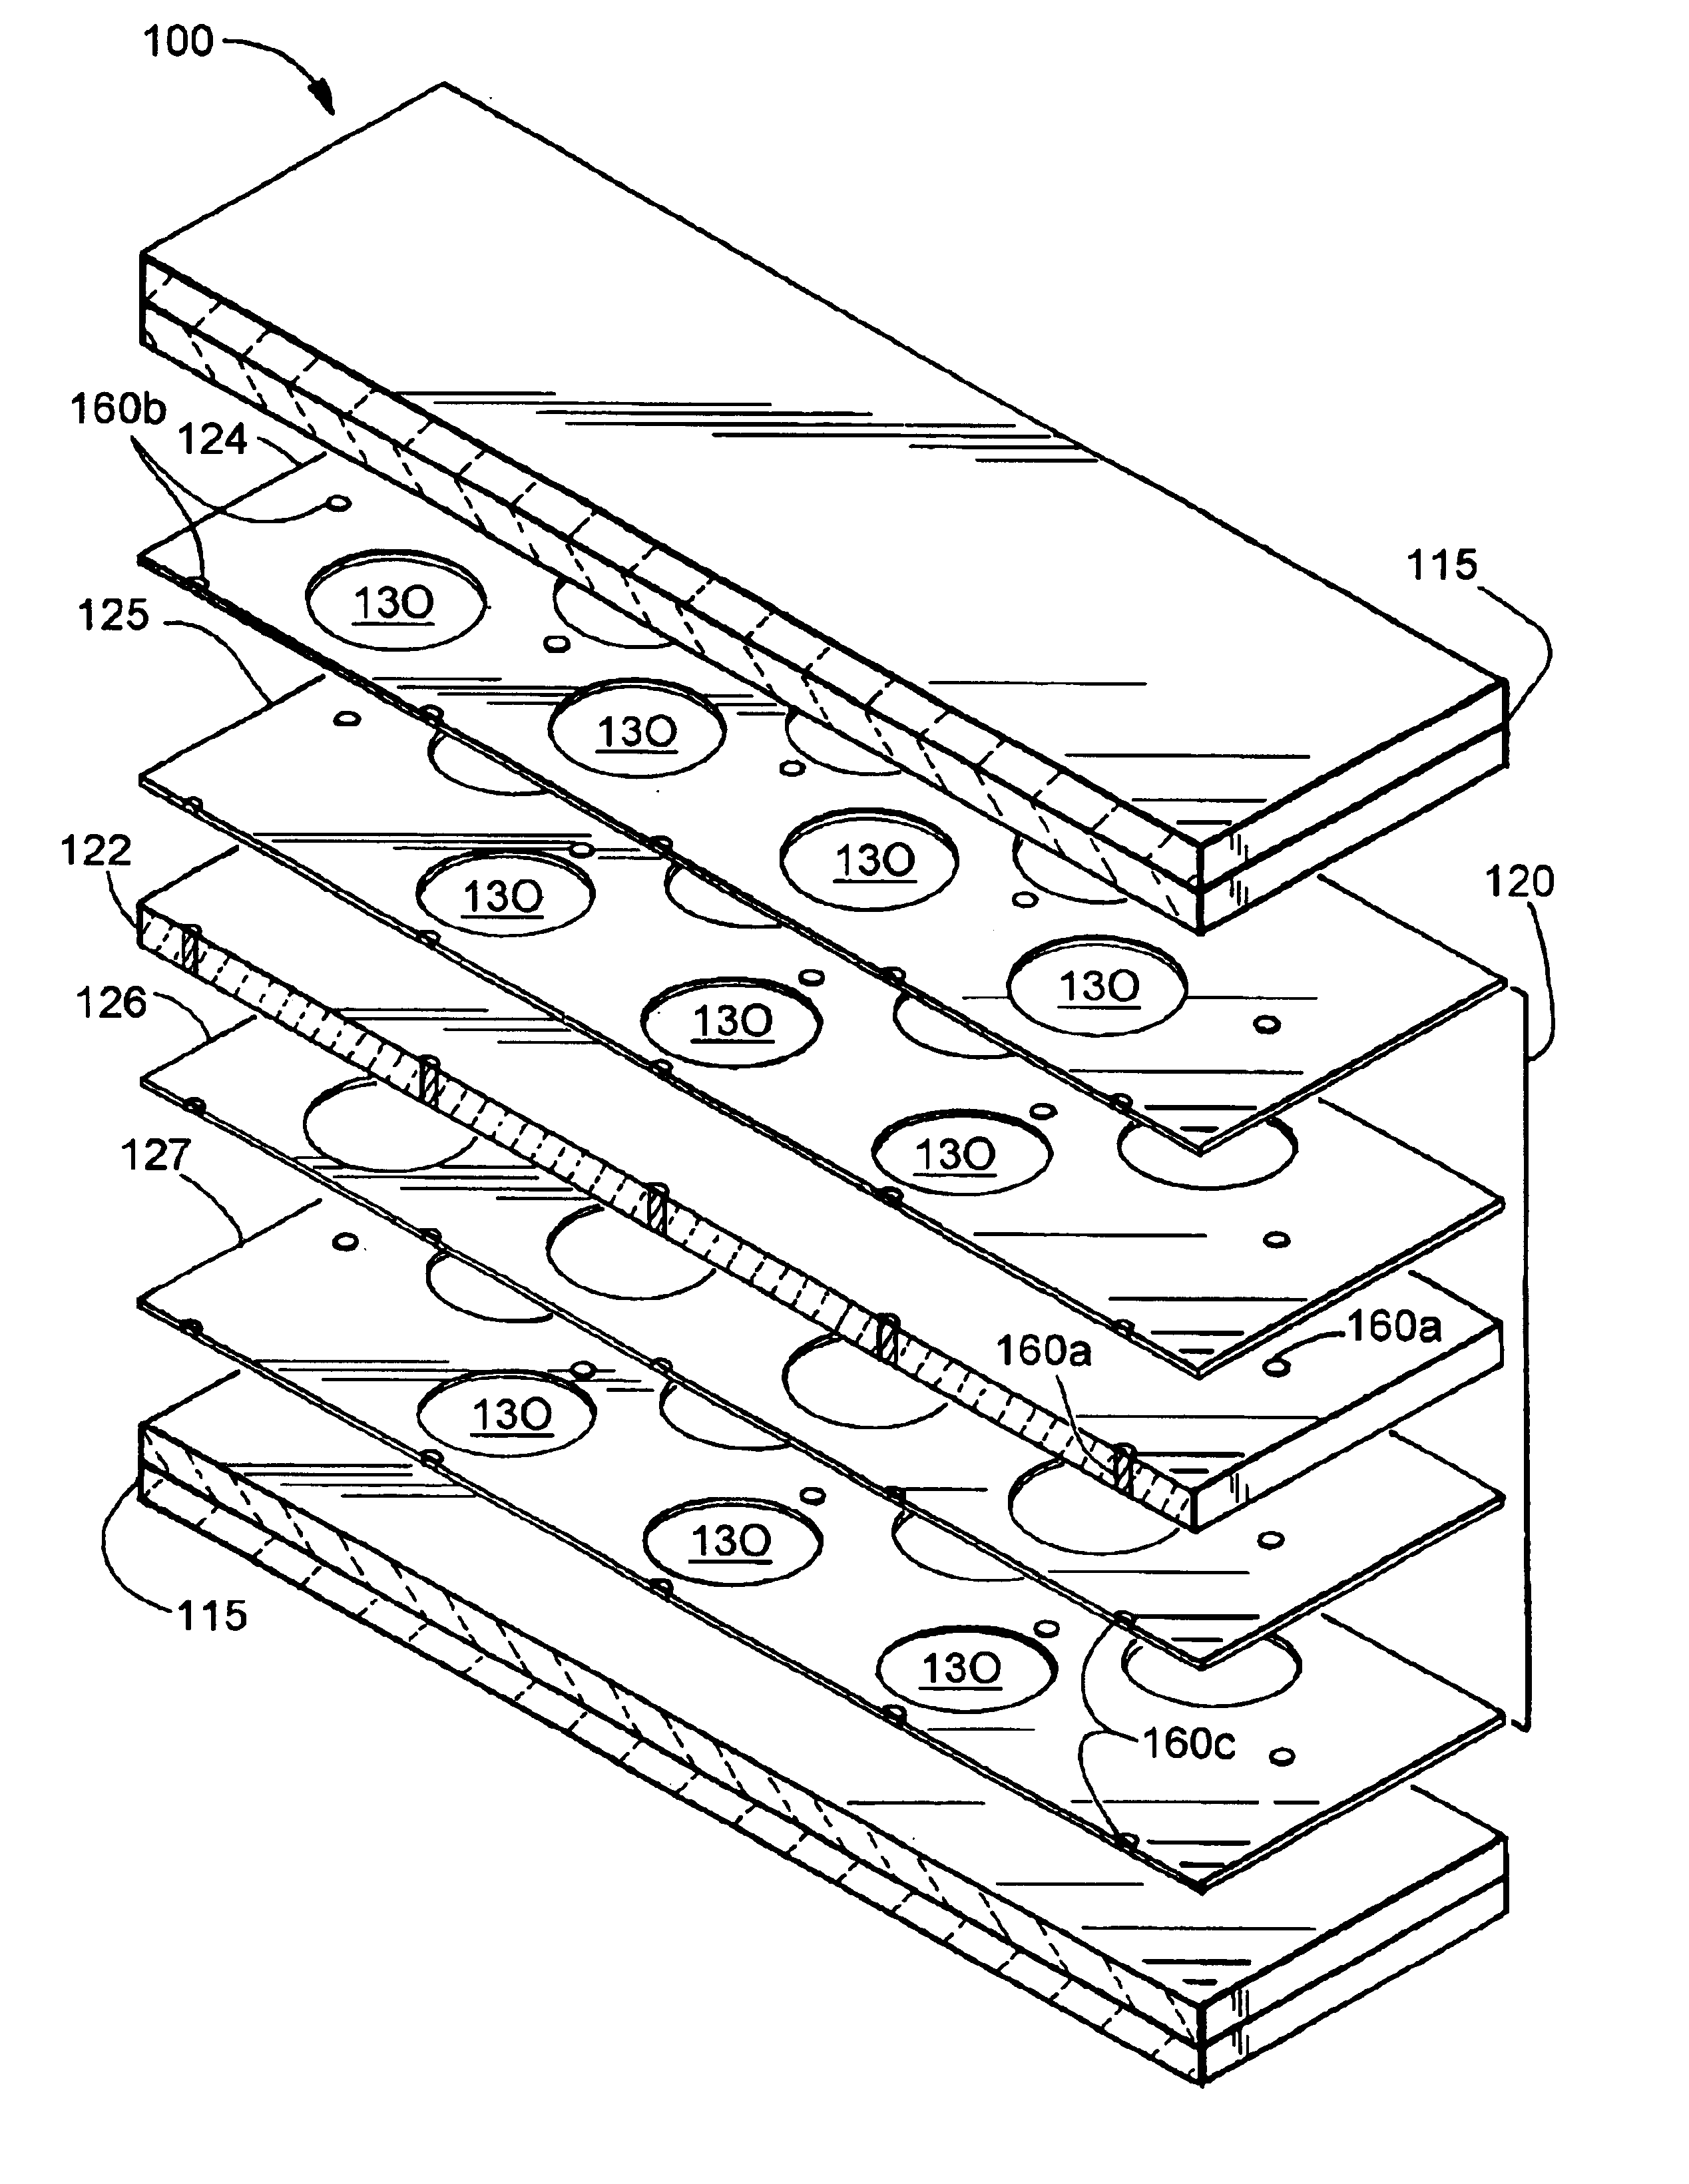 High performance ceramic fuel cell interconnect with integrated flowpaths and method for making same